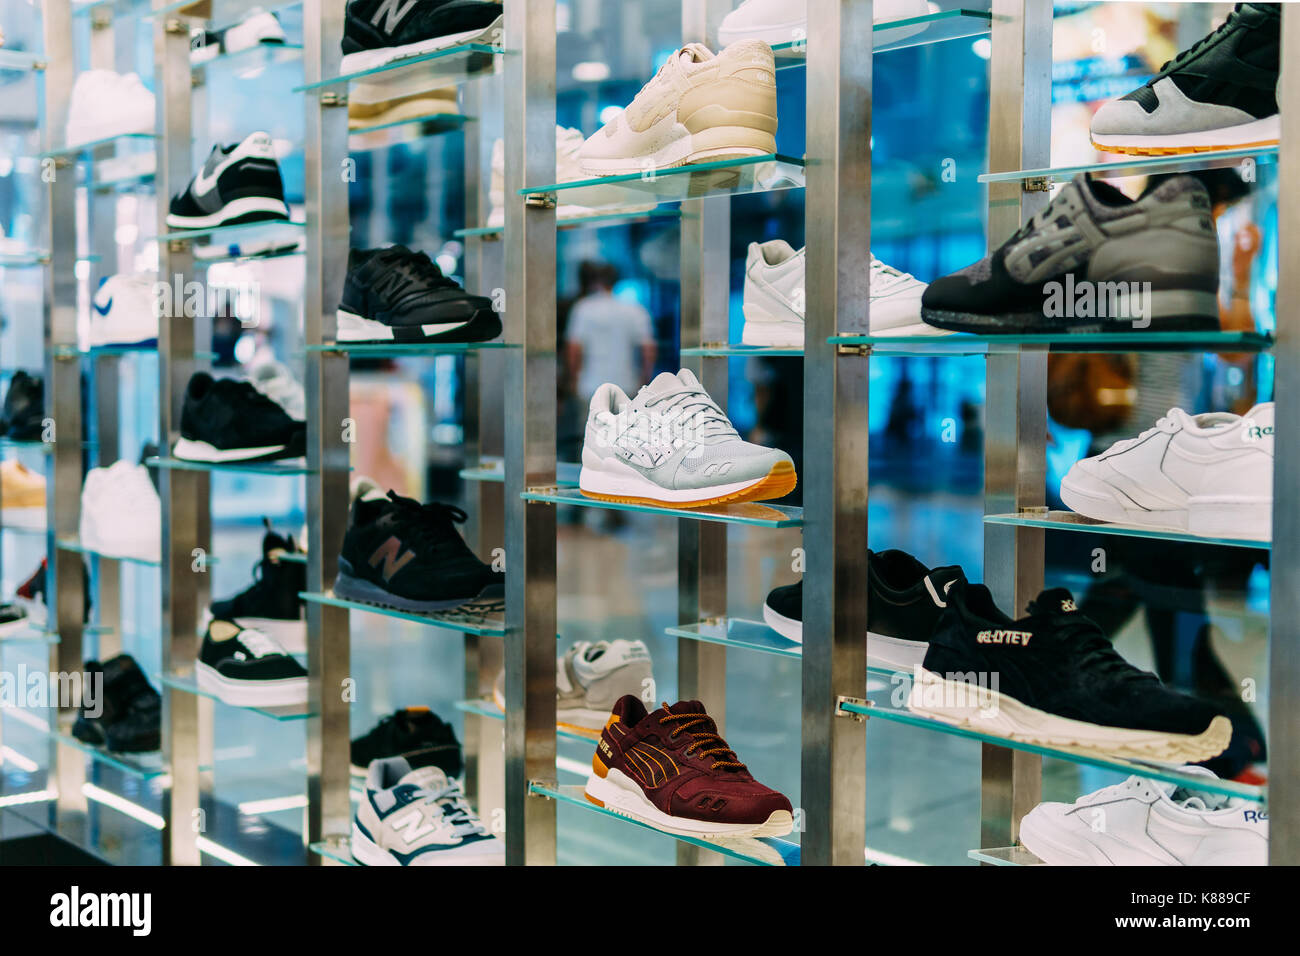 LISBON, PORTUGAL - AUGUST 10, 2017: Running And Casual Shoes For Sale In  Fashion Shoe Store Stock Photo - Alamy